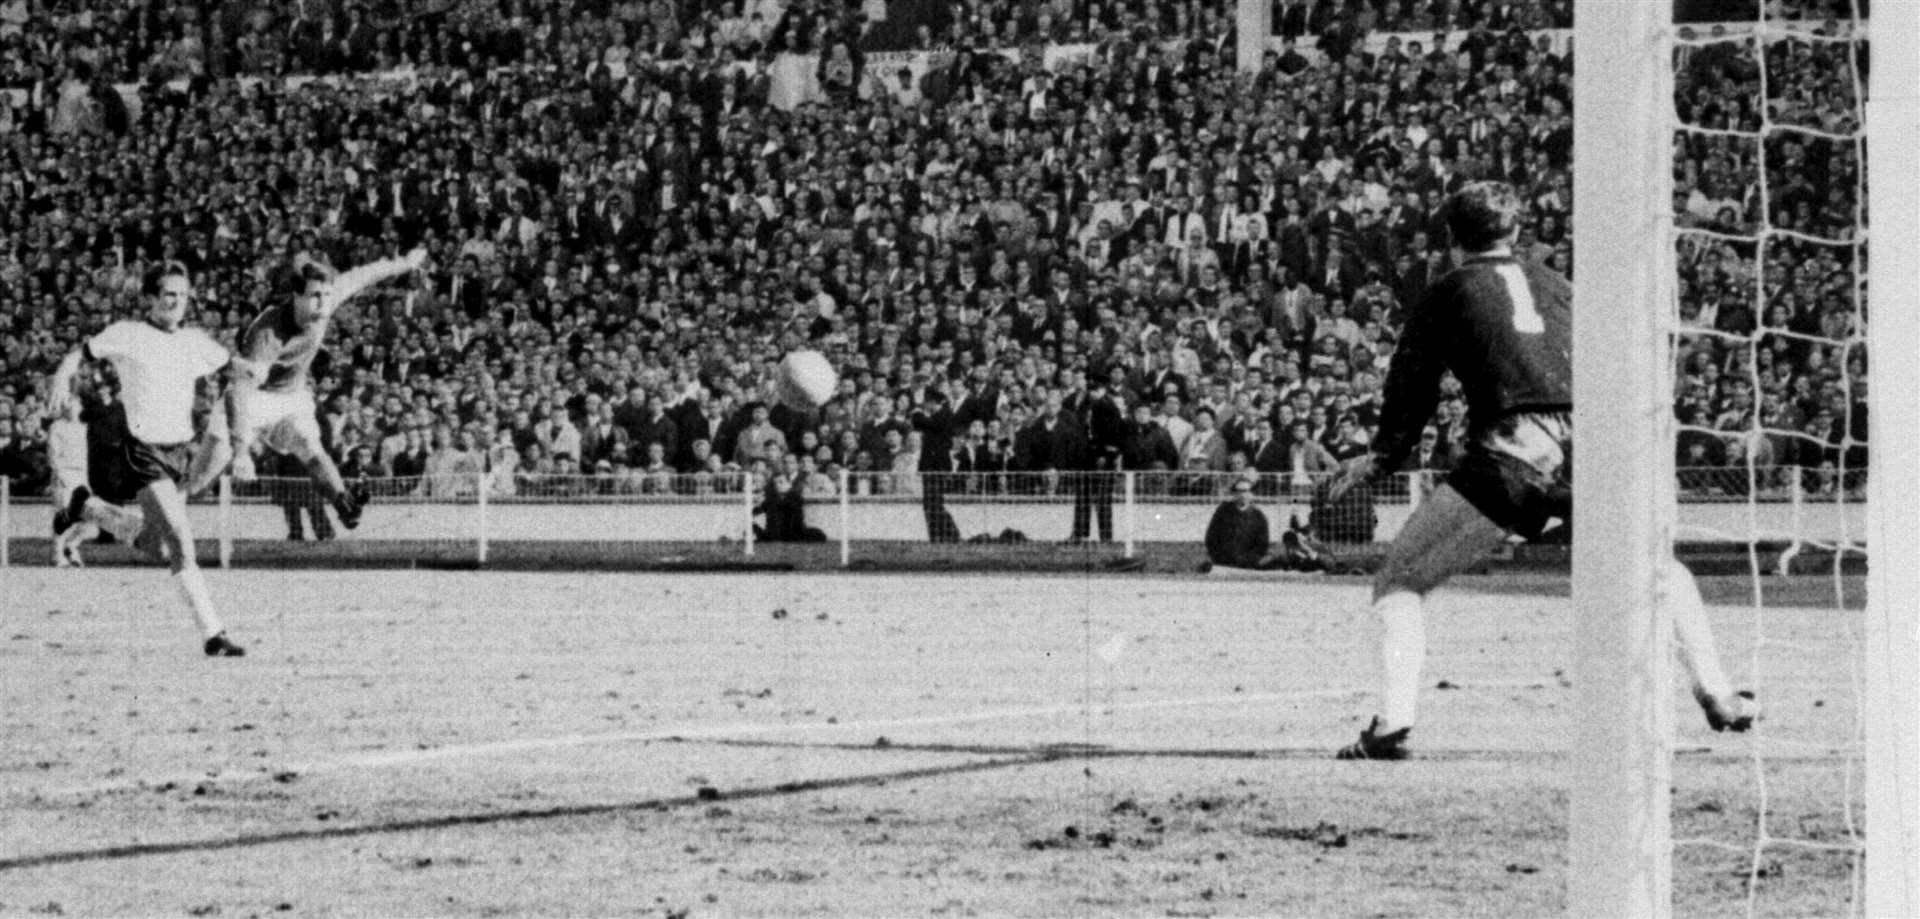 Geoff Hurst scoring the final goal at Wembley in 1966. PA Photos